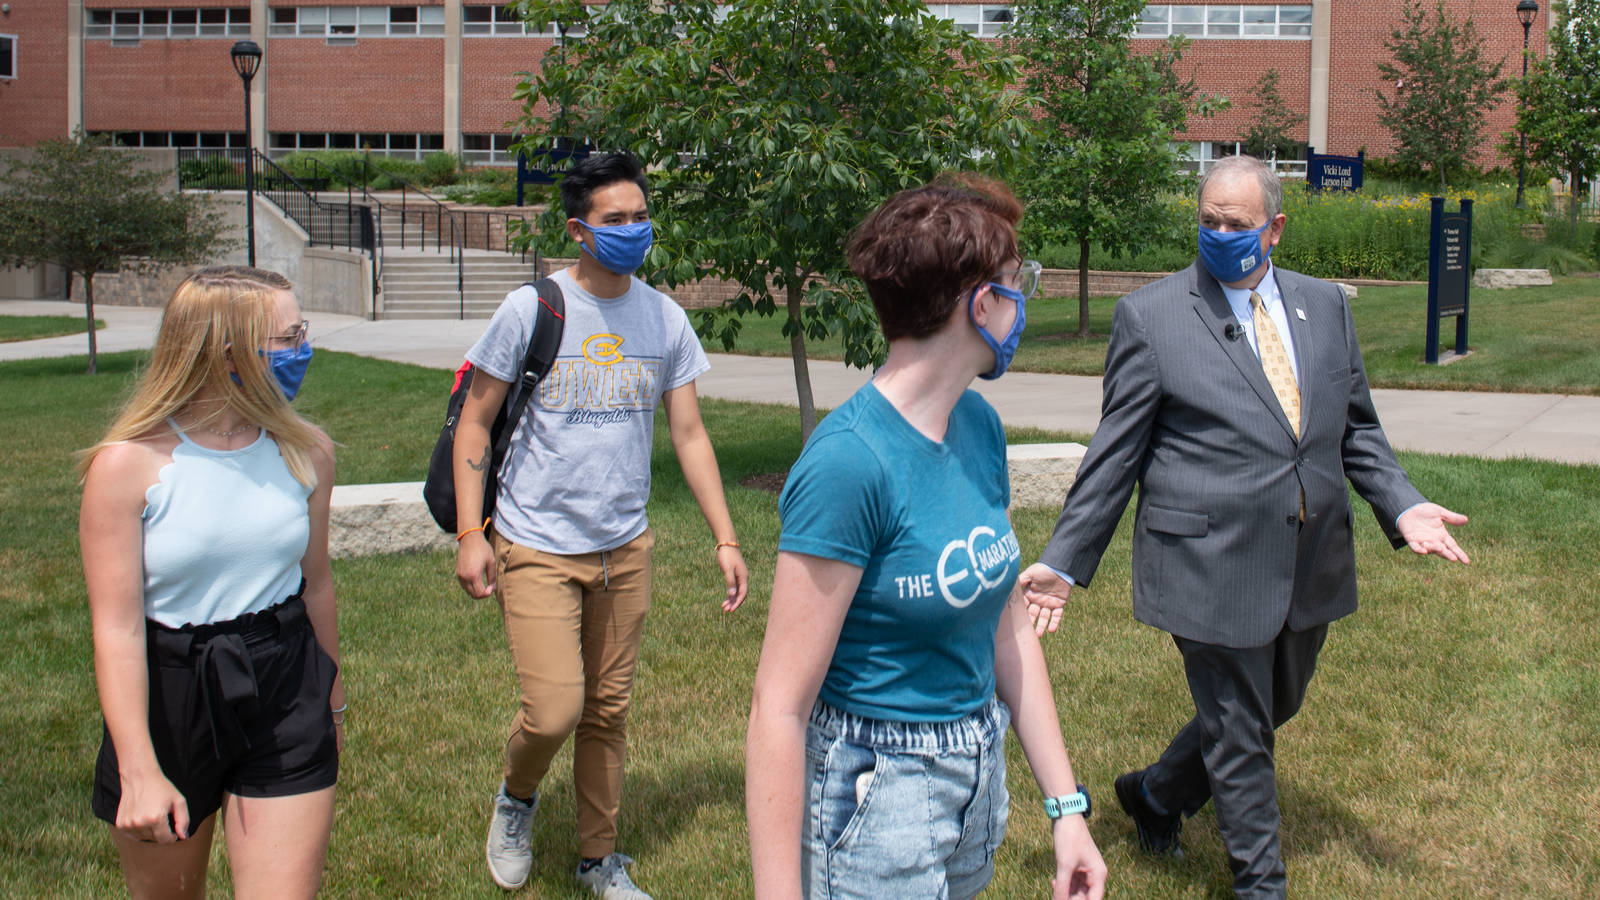 Chancellor Schmidt walks on campus with students pre-reopeing, waering masks